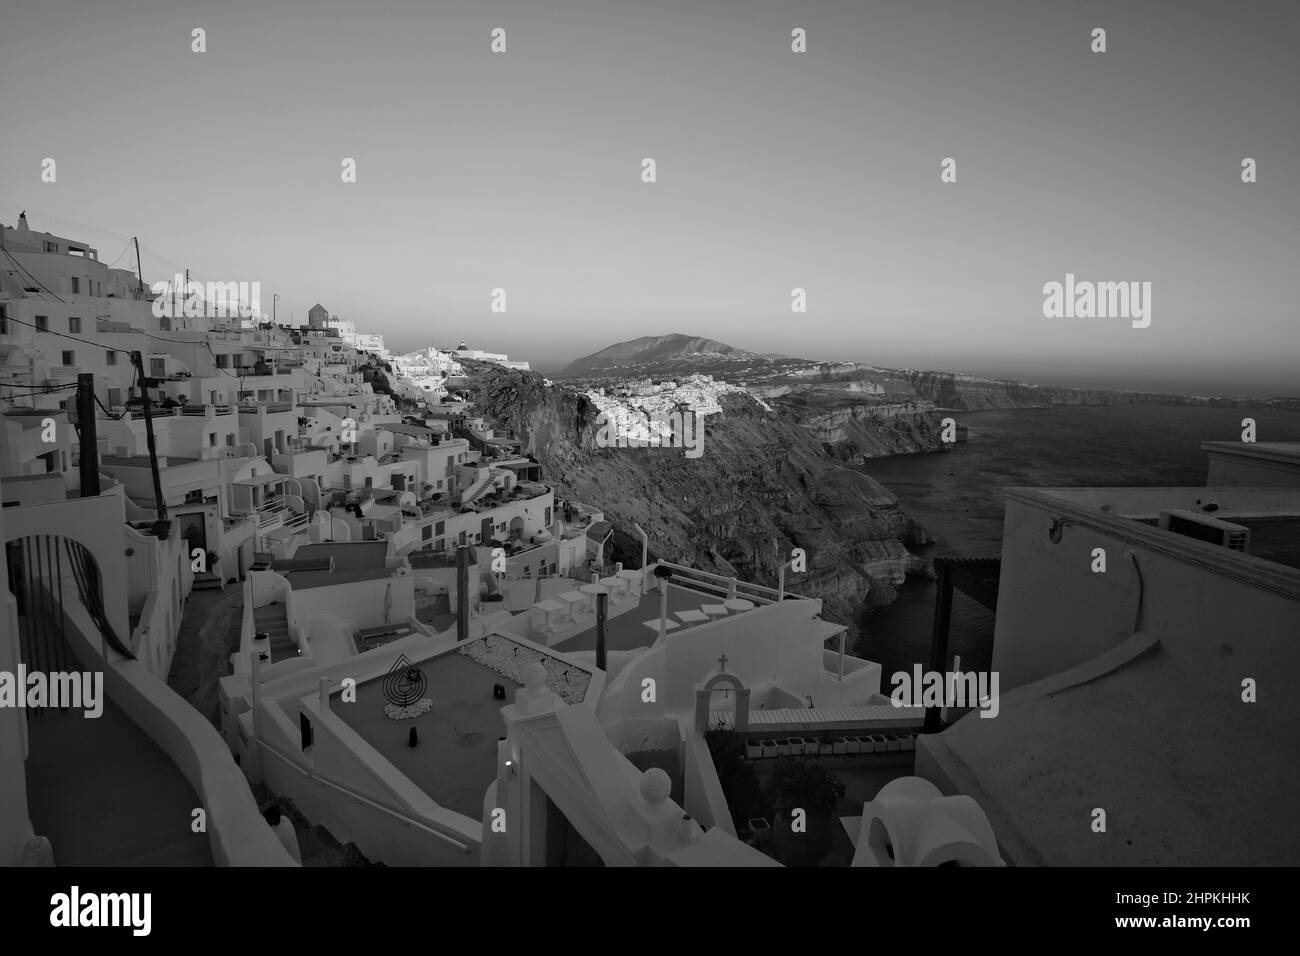 Panoramic view of the picturesque whitewashed village of Imerovigli in black and white Stock Photo